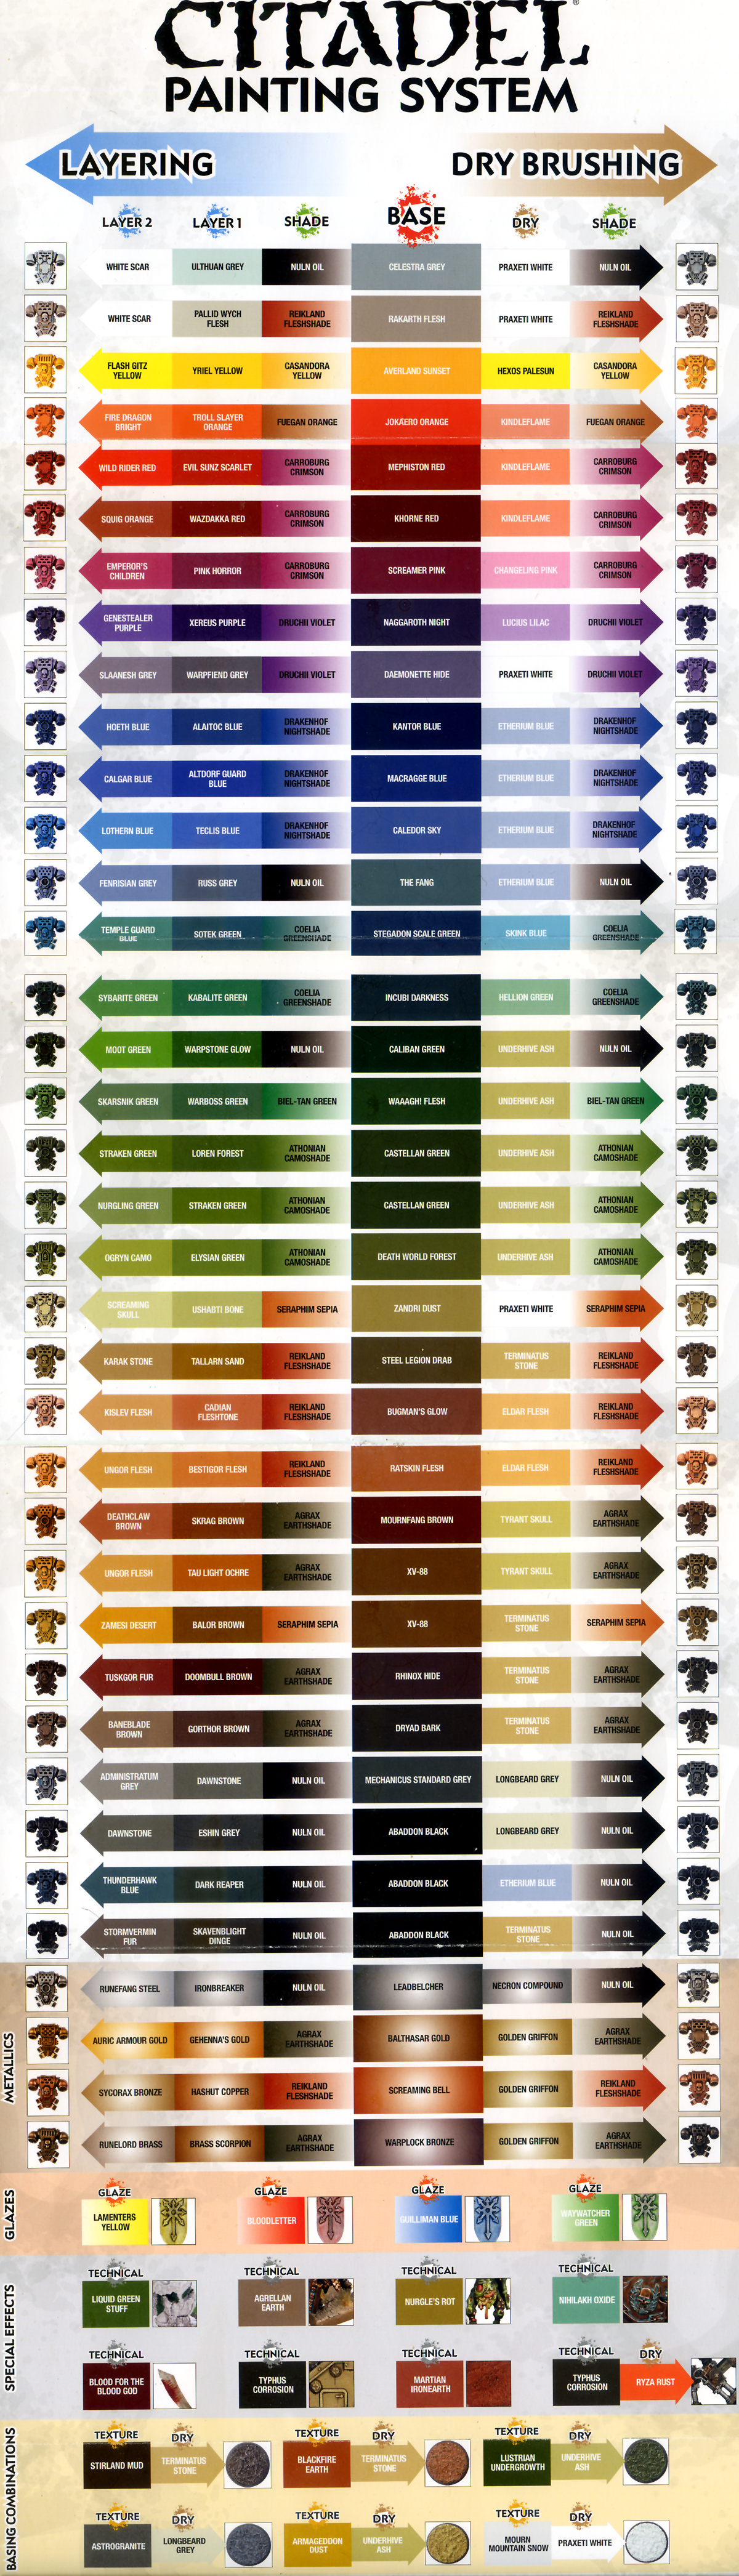 Painting Guide, Citadel Painting Chart Full